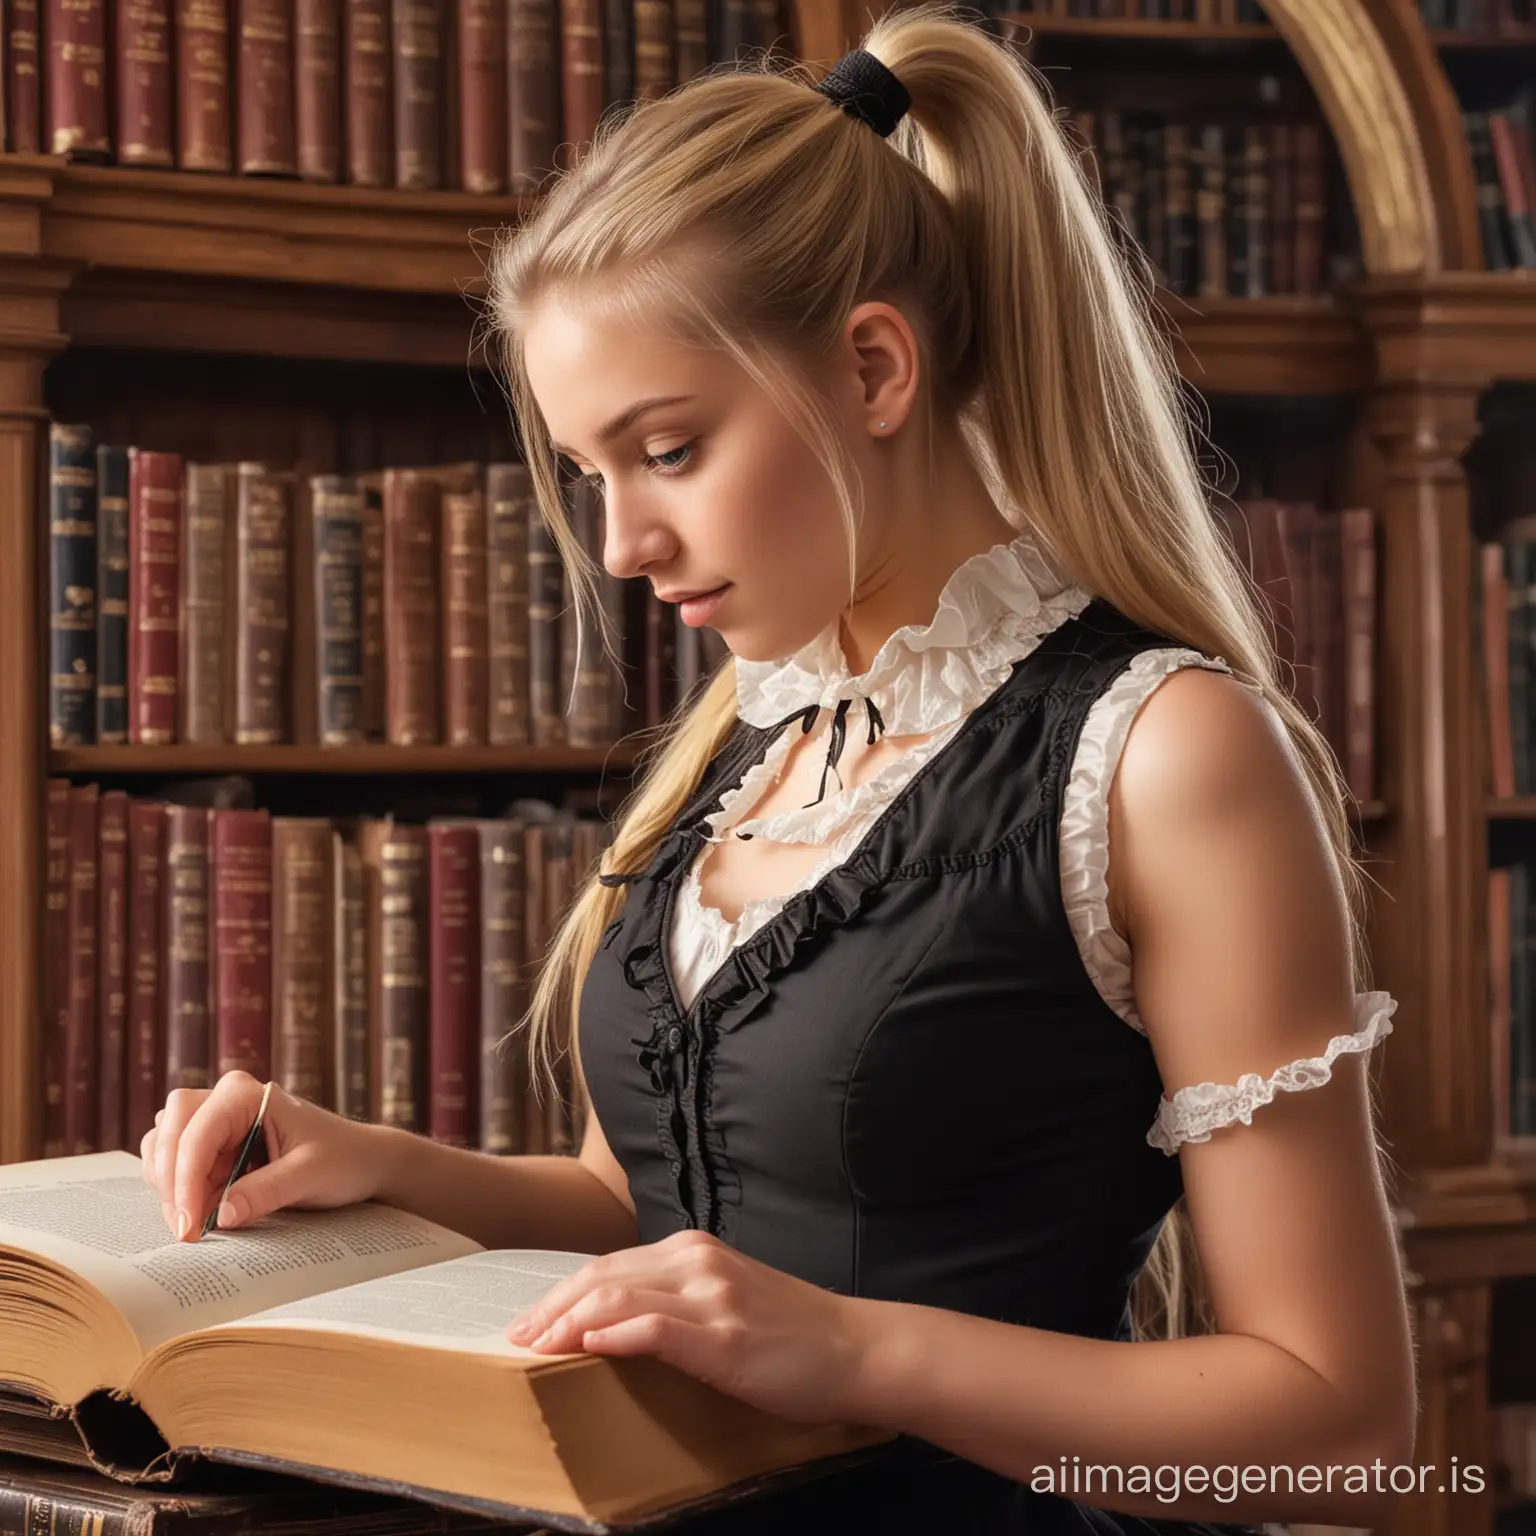 Sixteen years old gorgeous blonde girl with ponytail reads a huge book in a Victorian library